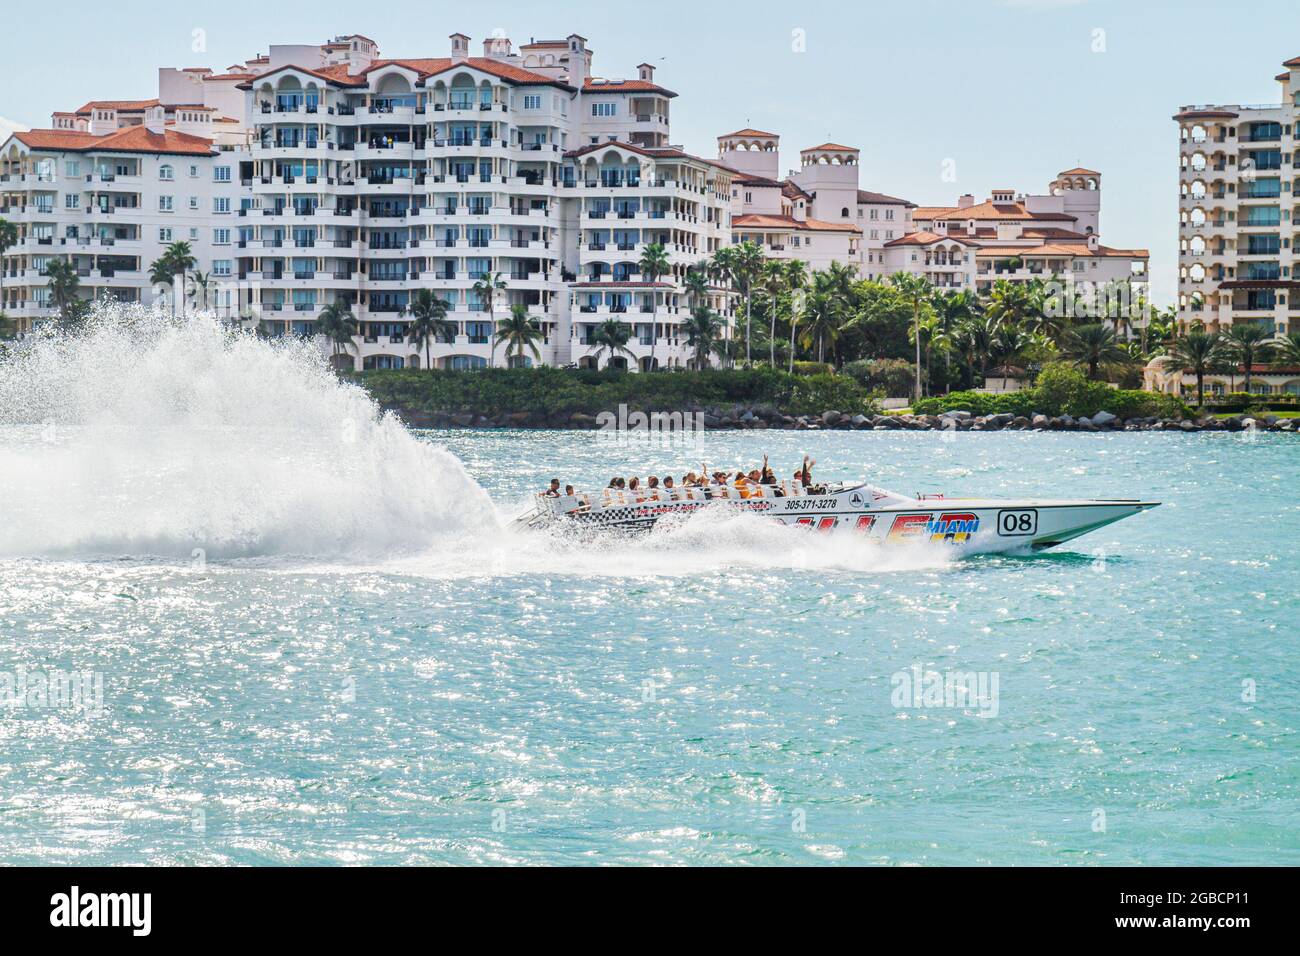 Miami Beach Florida,Government Cut Biscayne Bay water,Fisher Island condominium residential buildings cigarette speed boat, Stock Photo